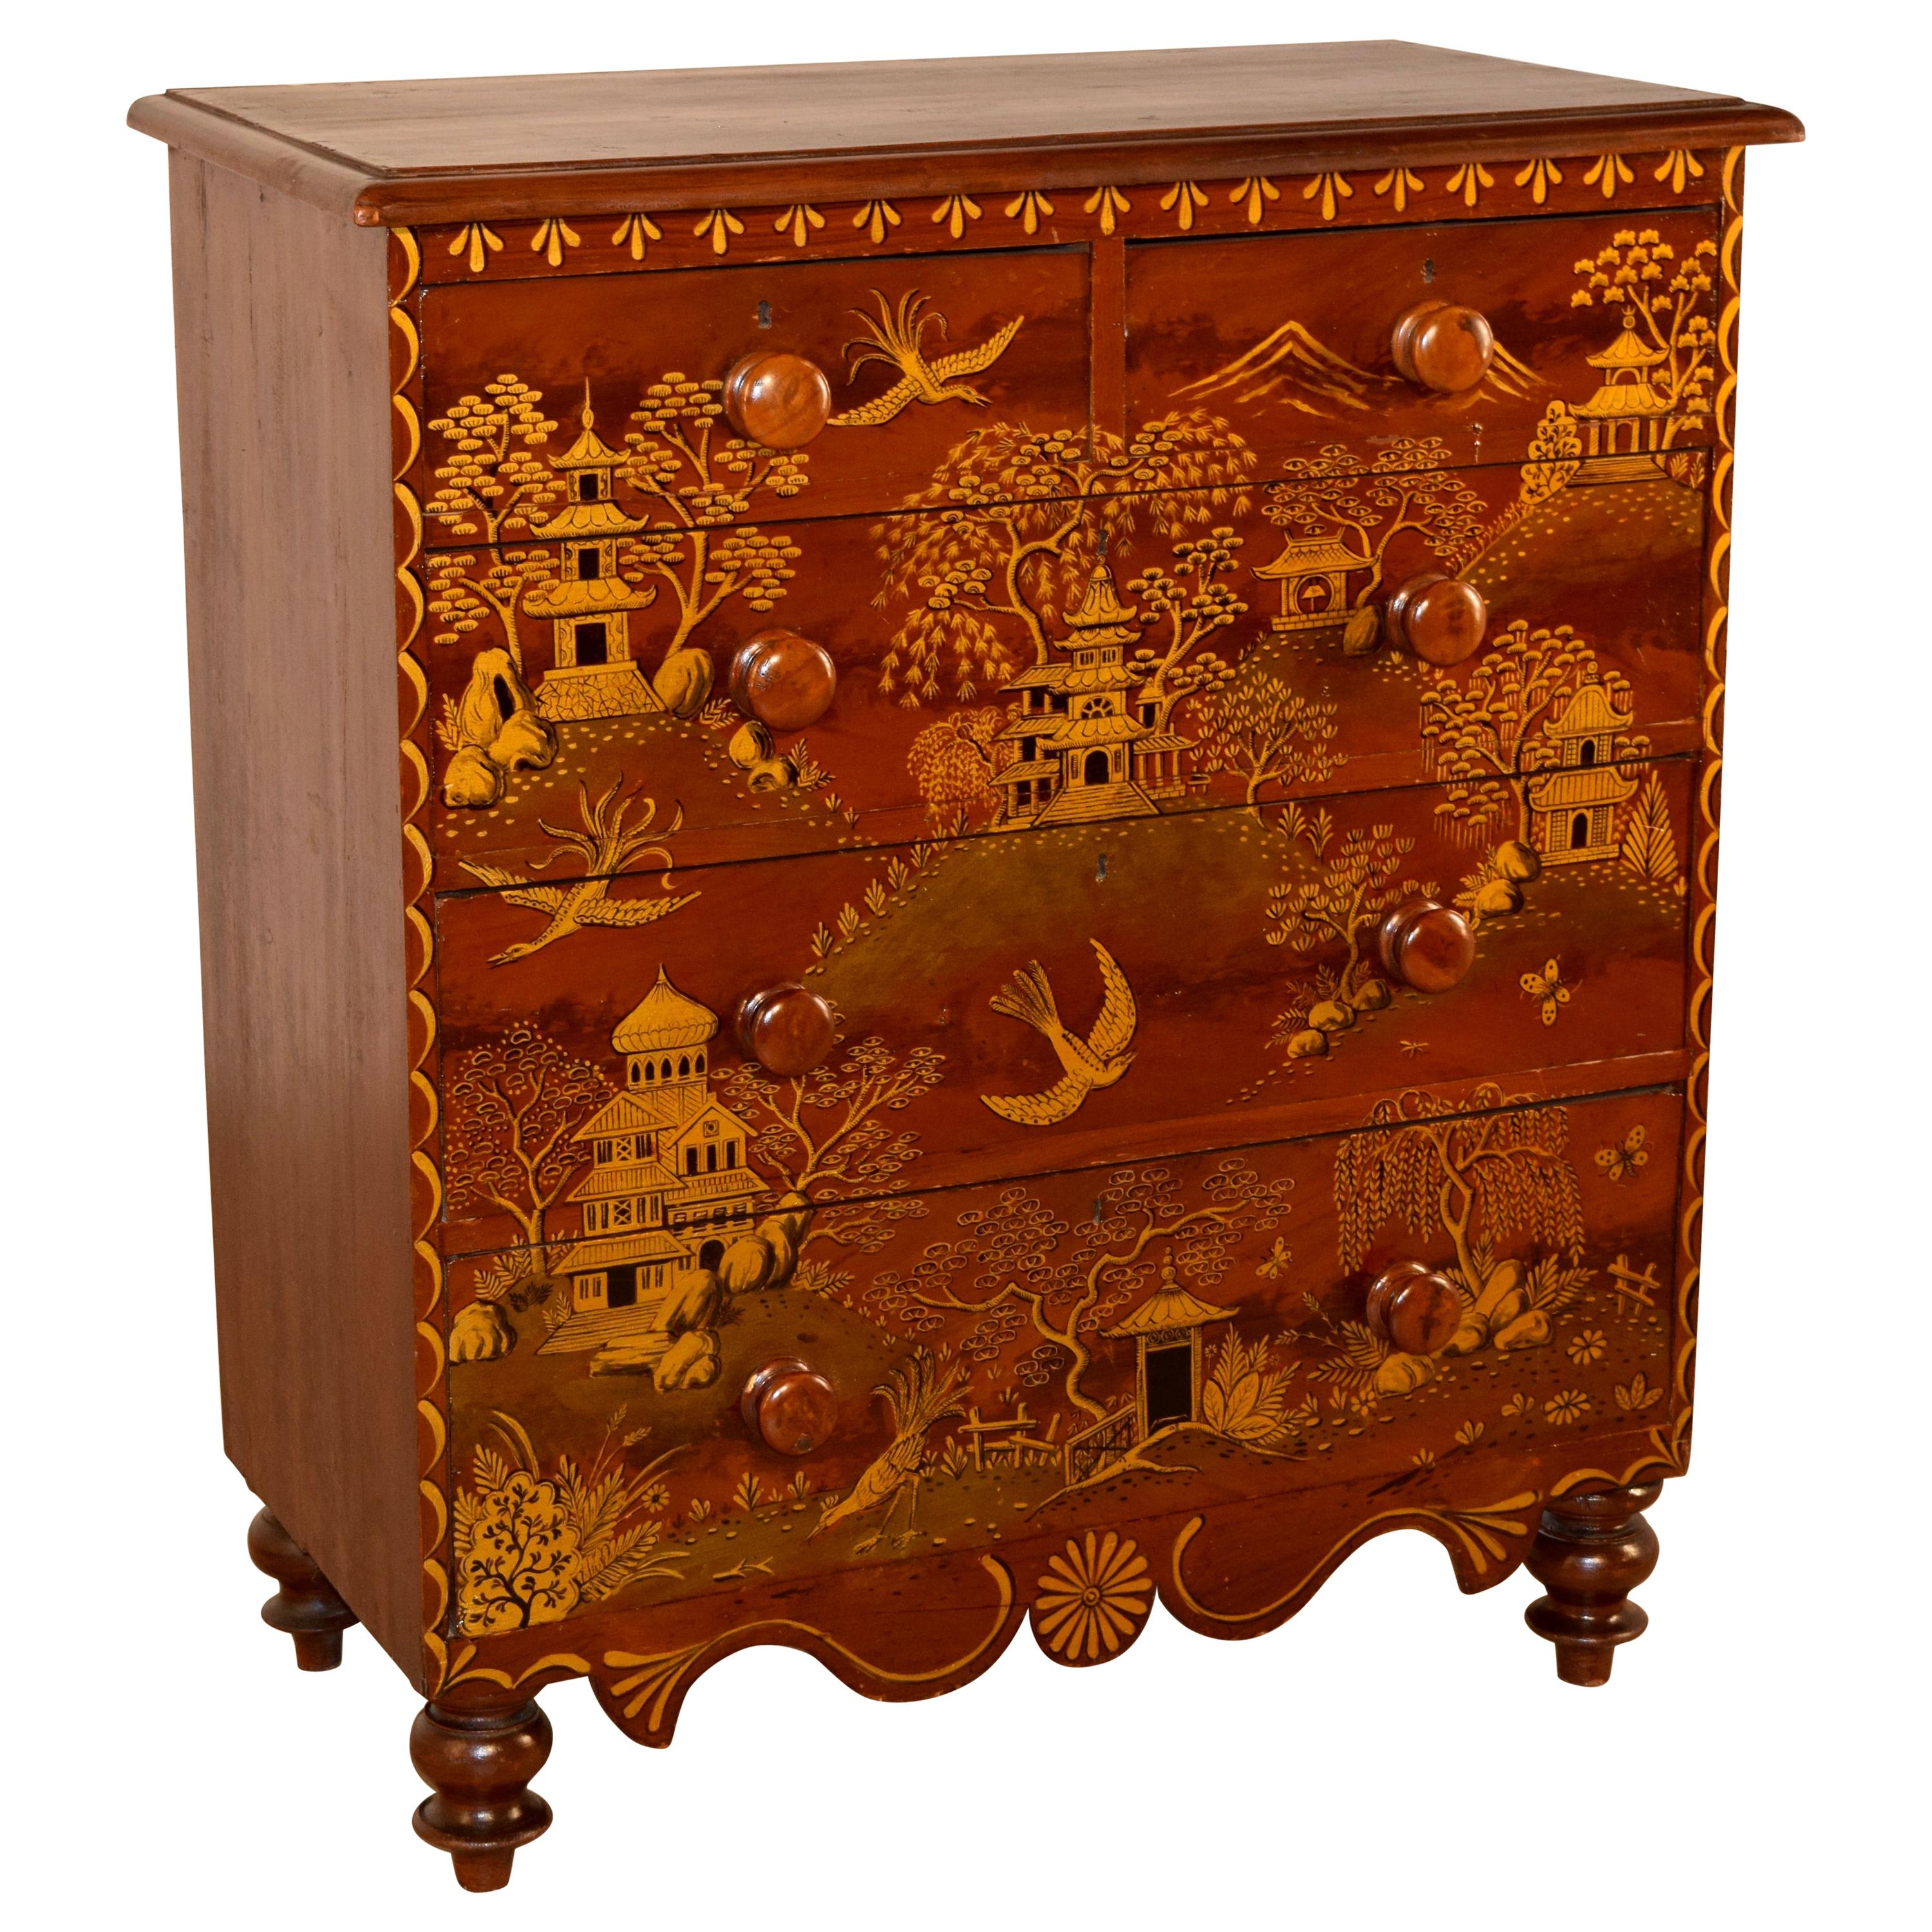 19th Century English Pine Chest with Chinoiserie Decoration